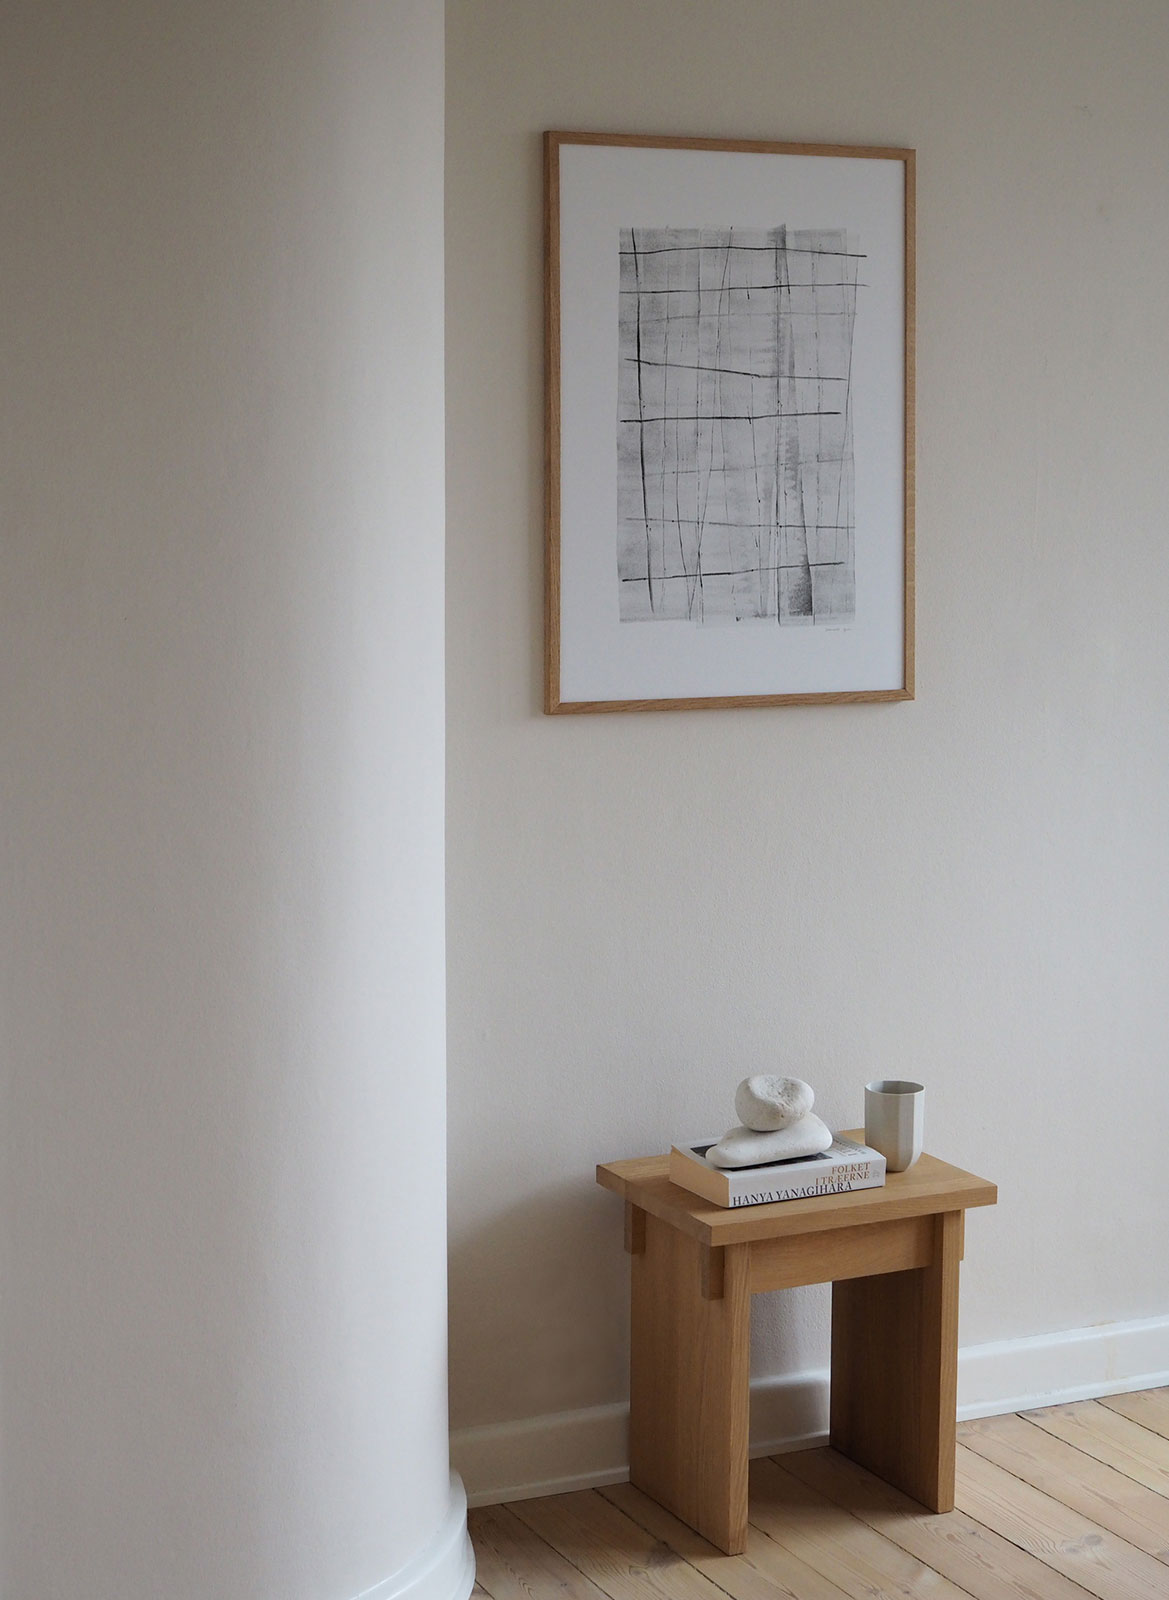 Framed black and white poster hanging above table by Atelier Cph